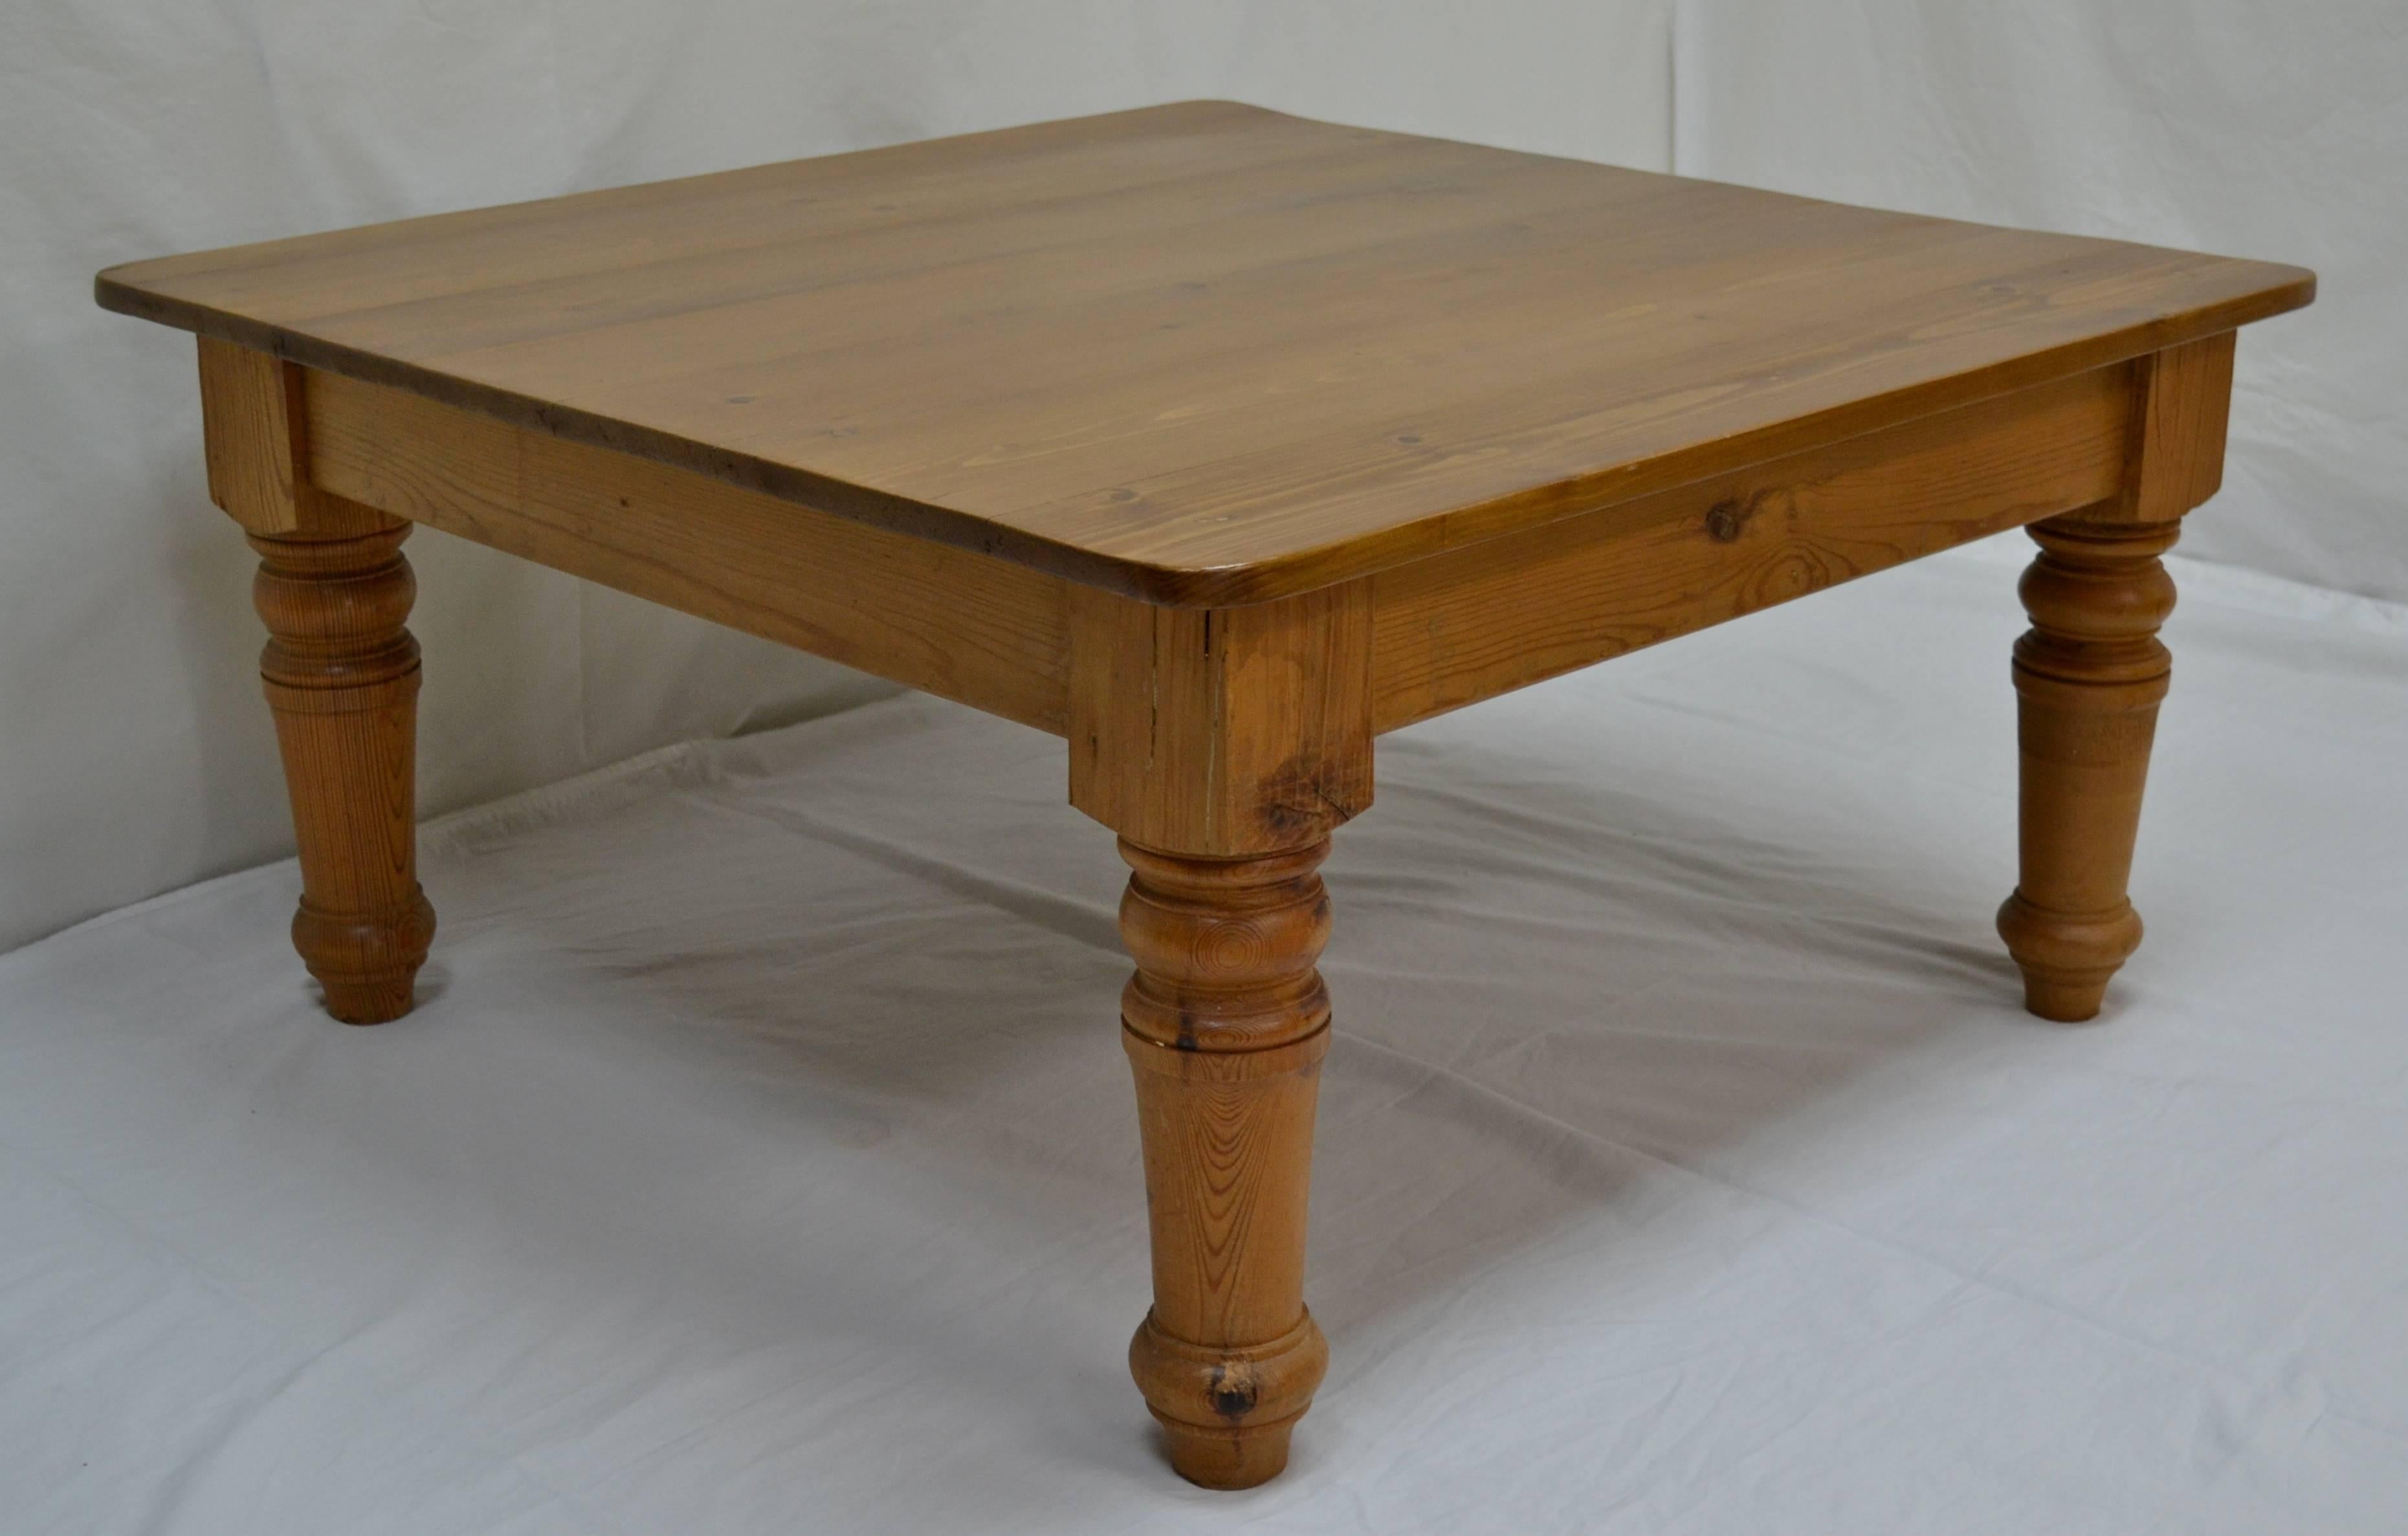 A small square turned leg coffee table constructed from reclaimed pine.  The five board top has a wipe-off lacquer finish.
